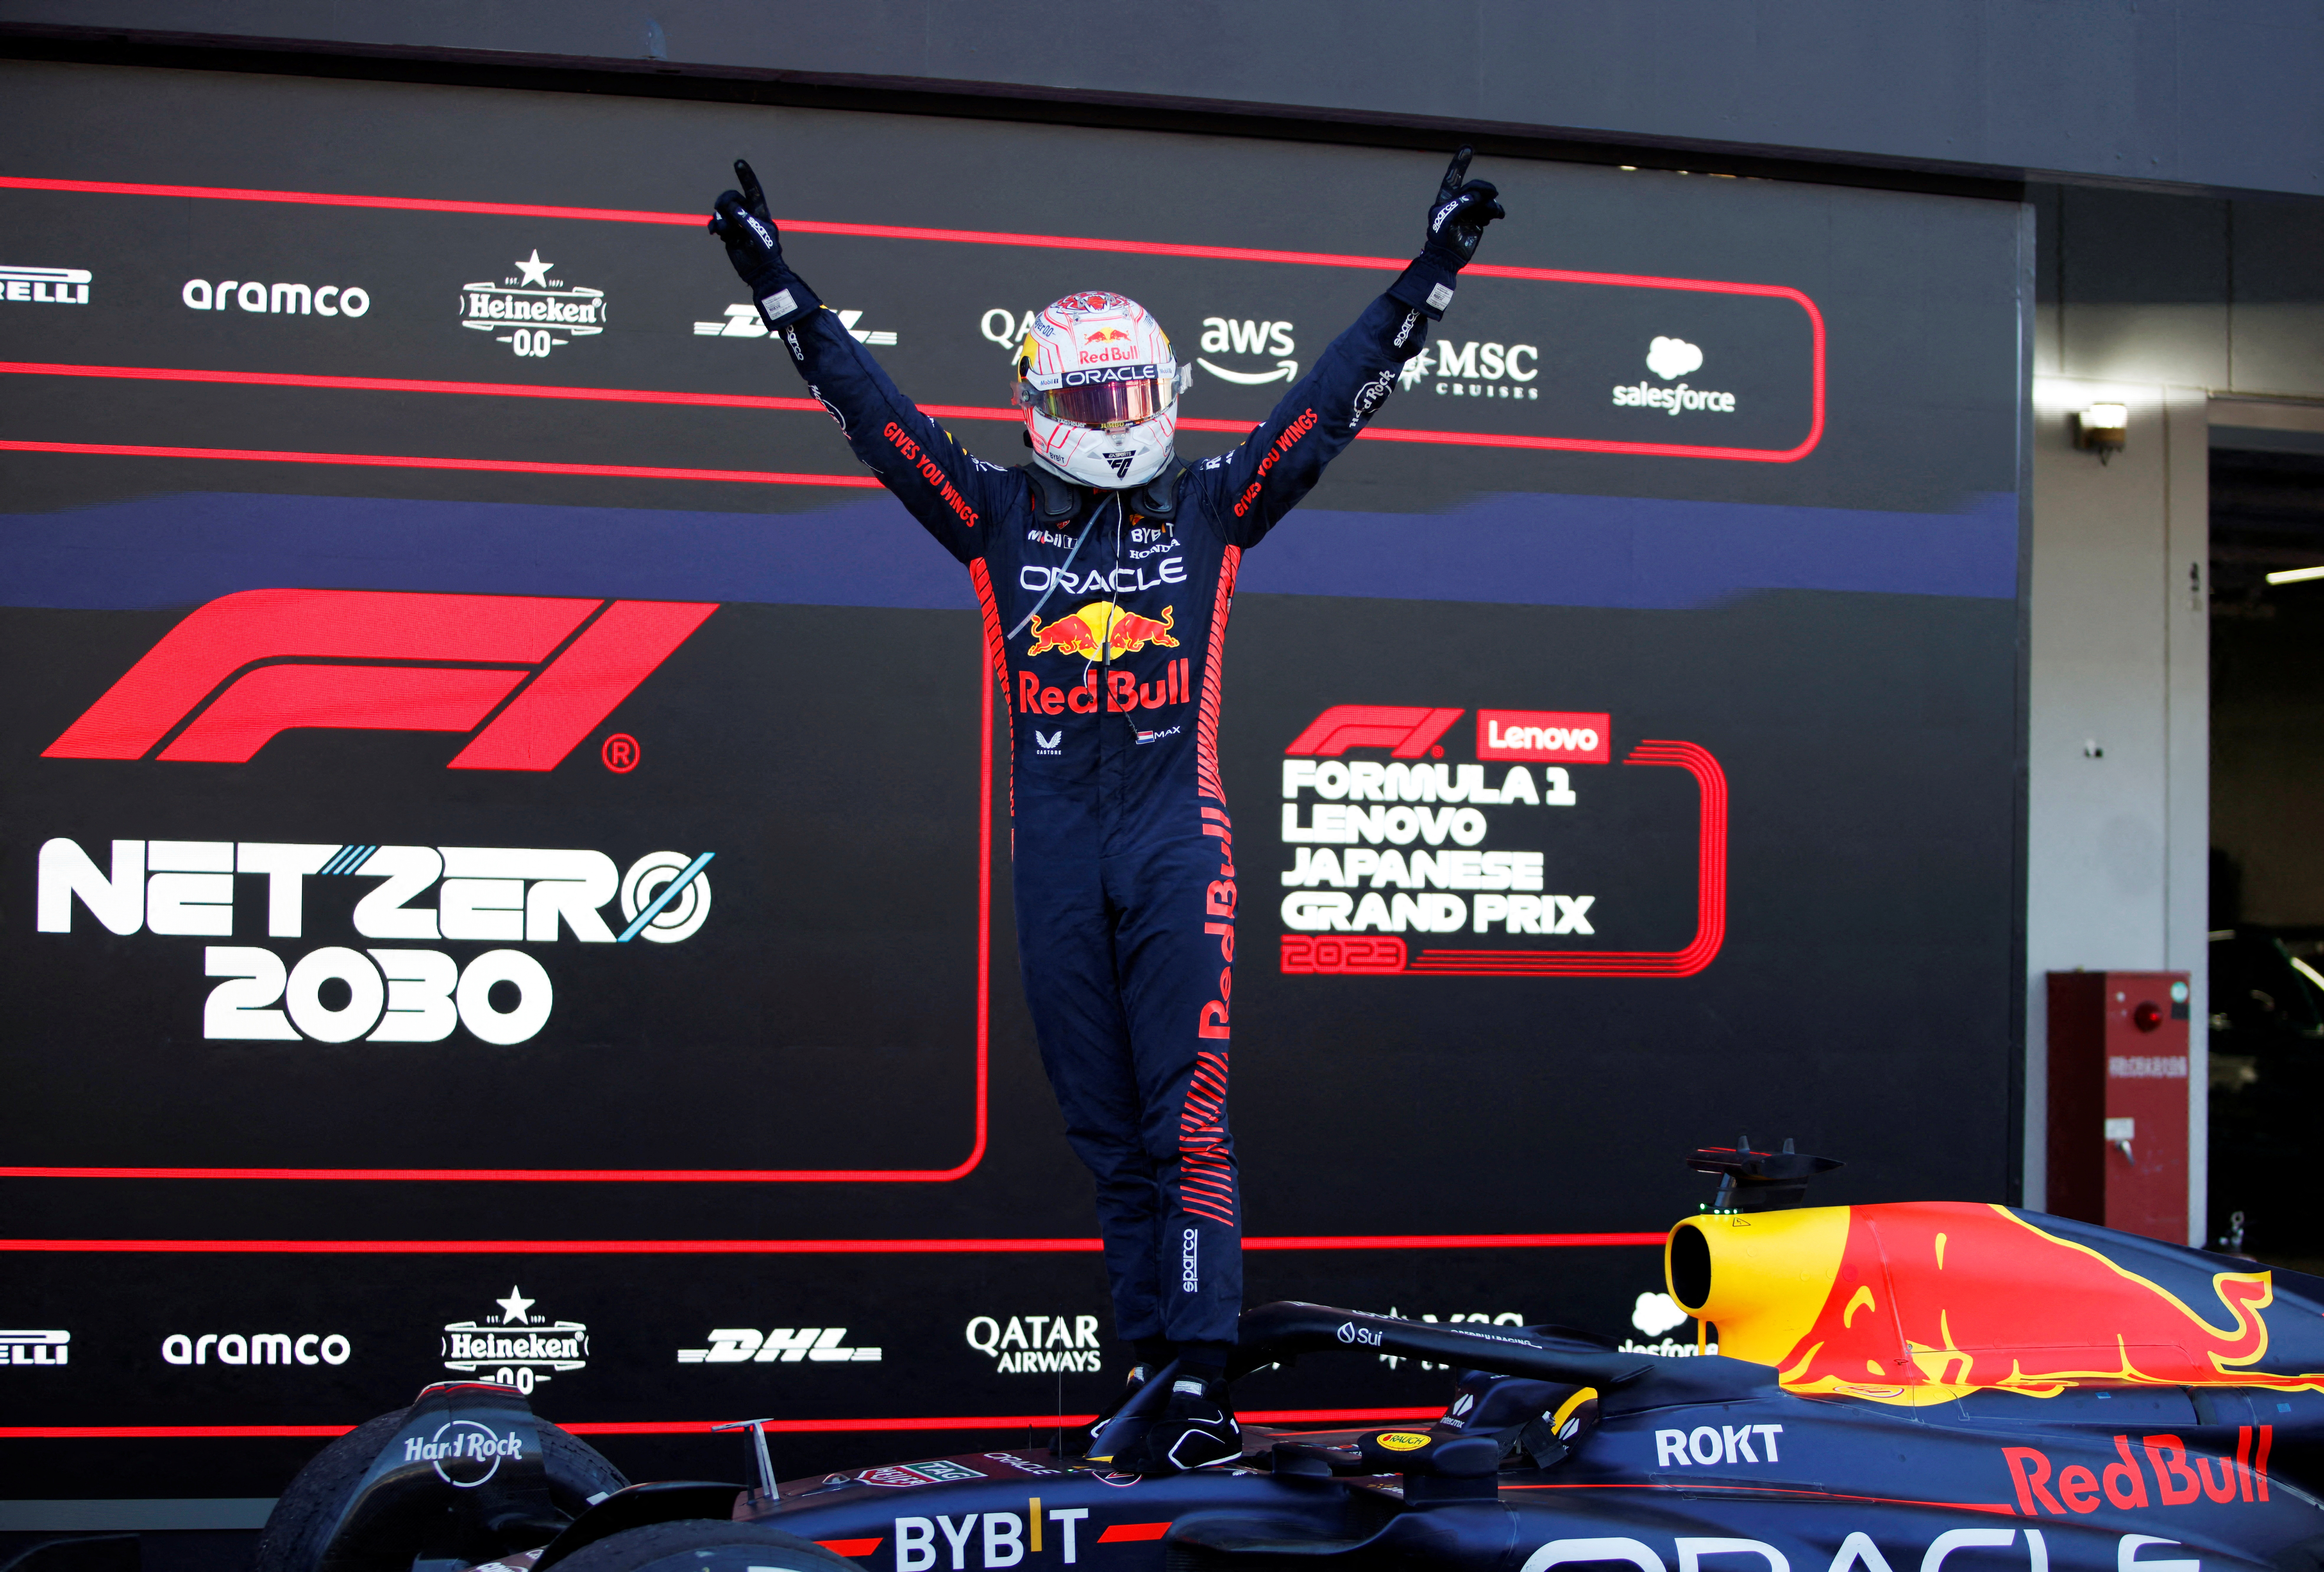 F1 – 2012 Brazilian Grand Prix Results – RED BULL RACING CLAIMS